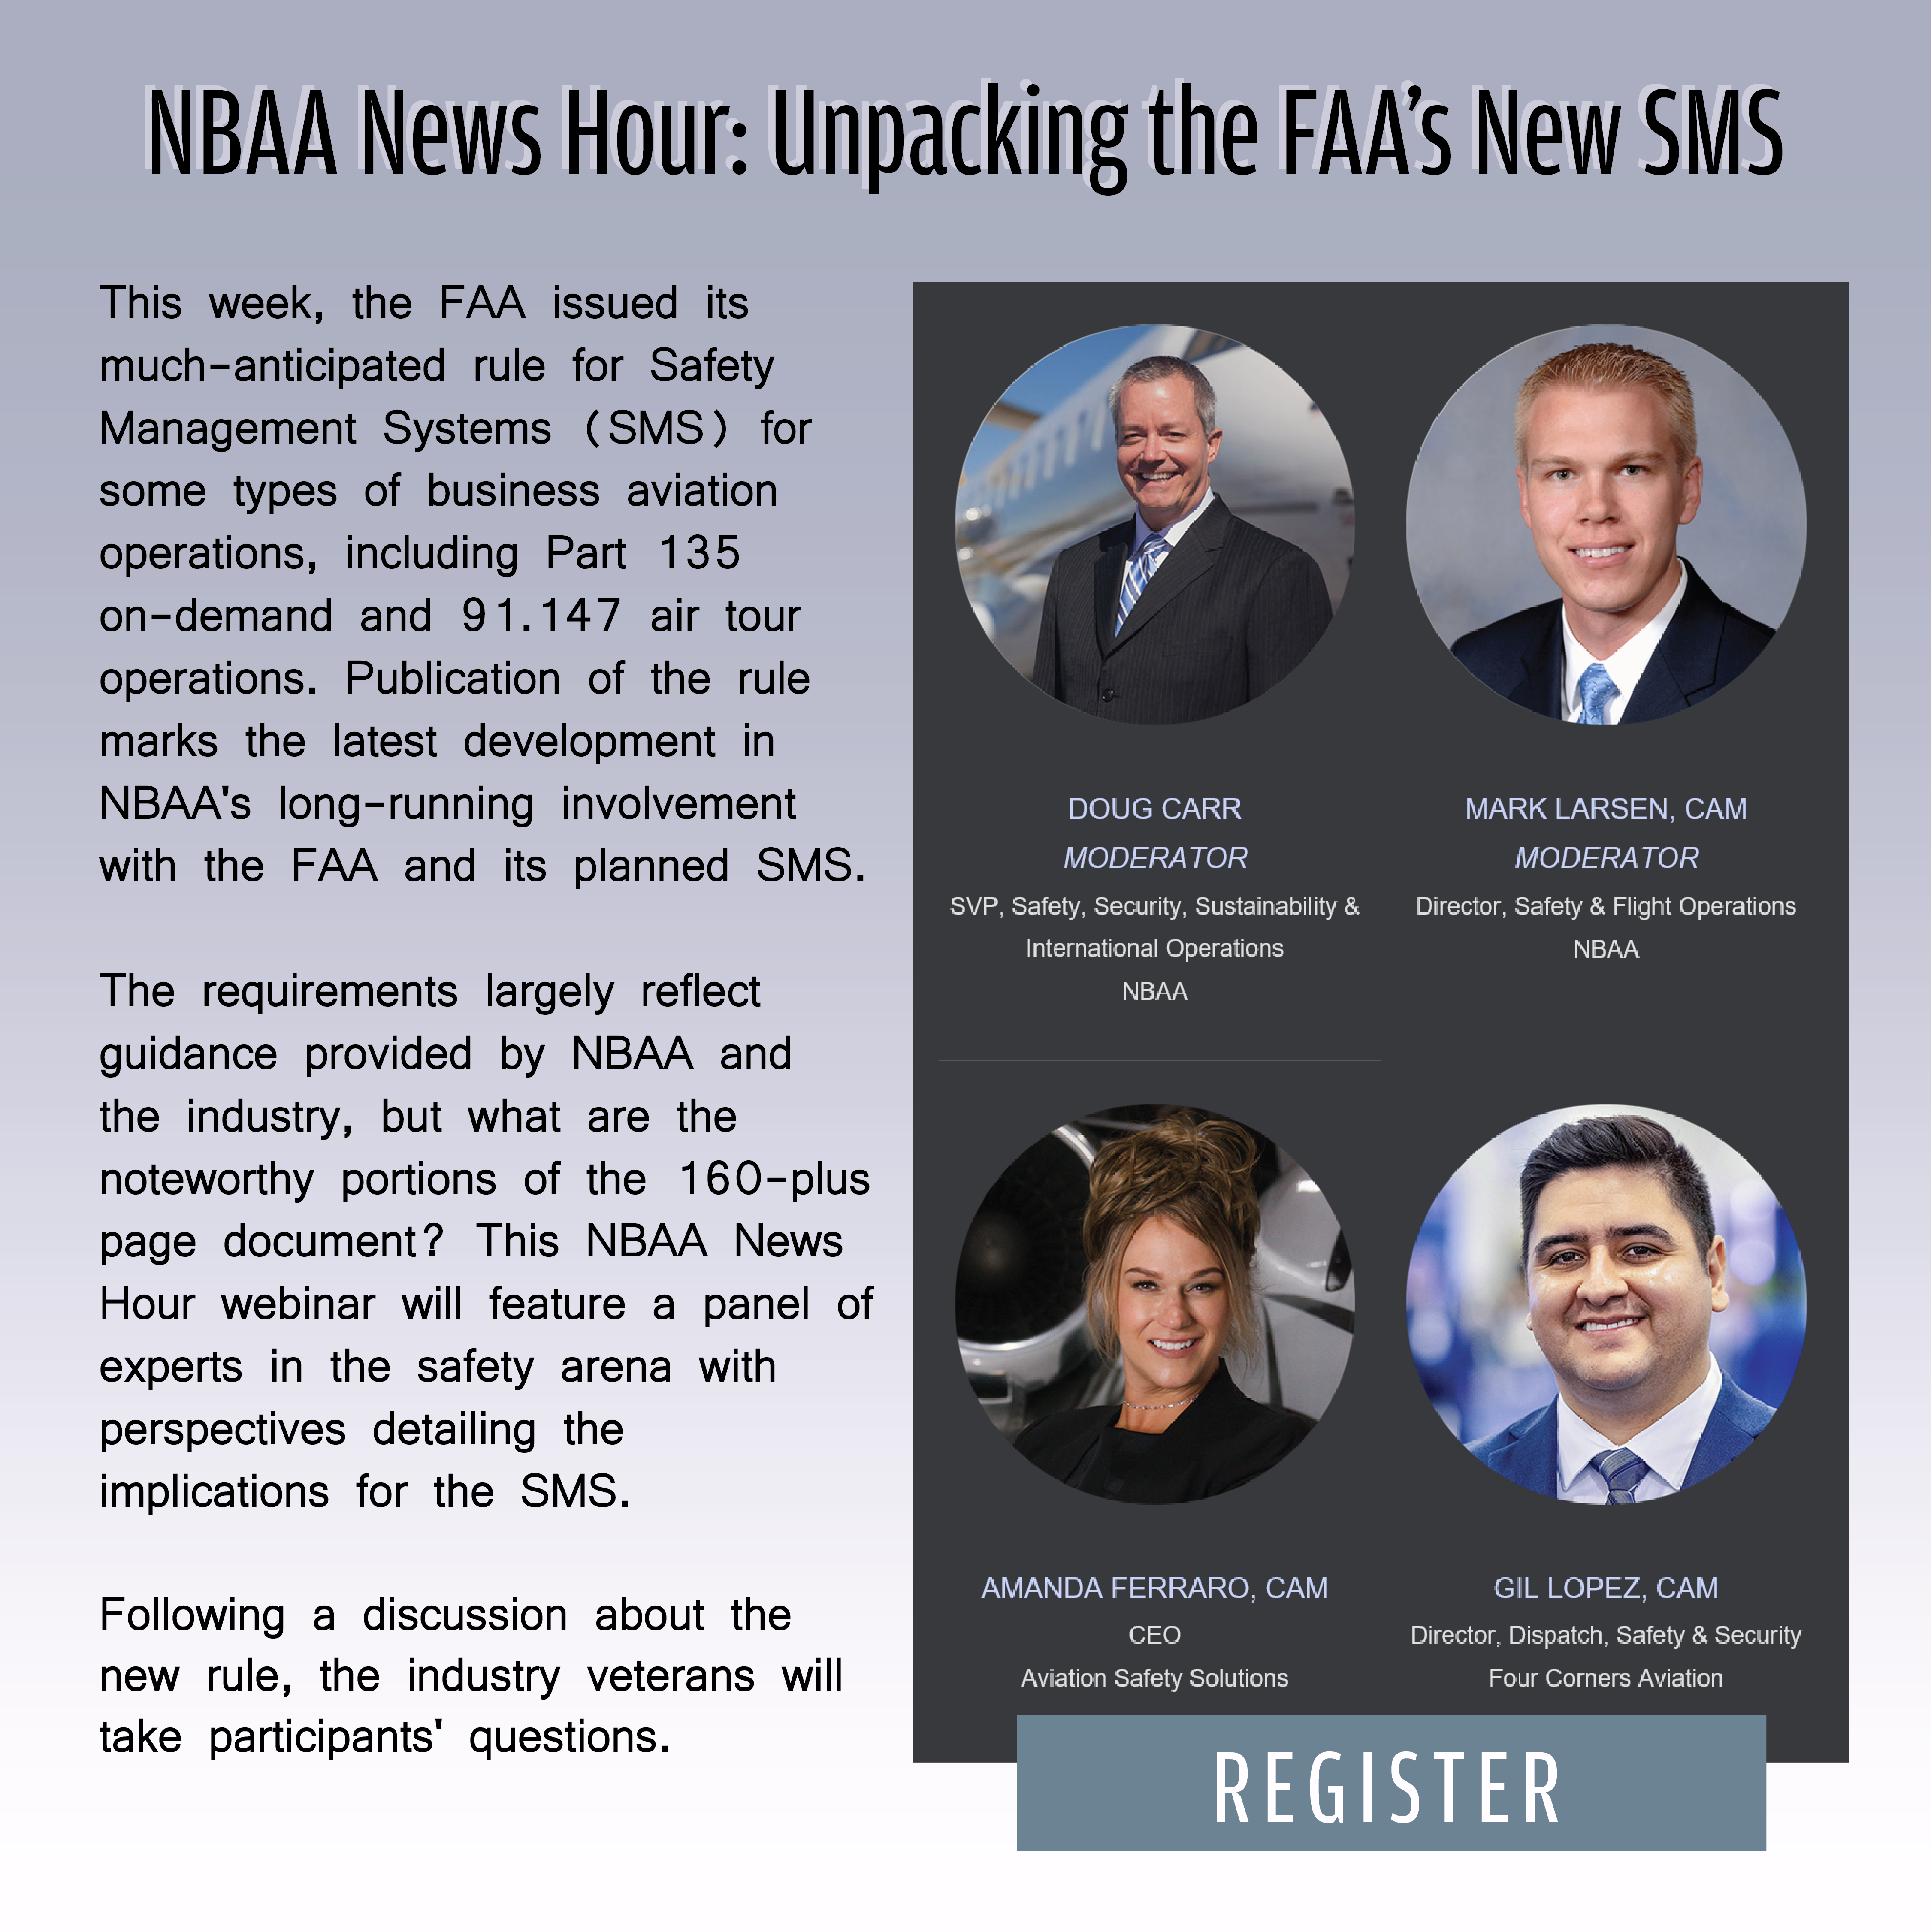 This week, the FAA issued its much-anticipated rule for Safety Management Systems (SMS) for some types of business aviation operations, including Part 135 on-demand and 91.147 air tour operations. Publication of the rule marks the latest development in NBAA's long-running involvement with the FAA and its planned SMS.